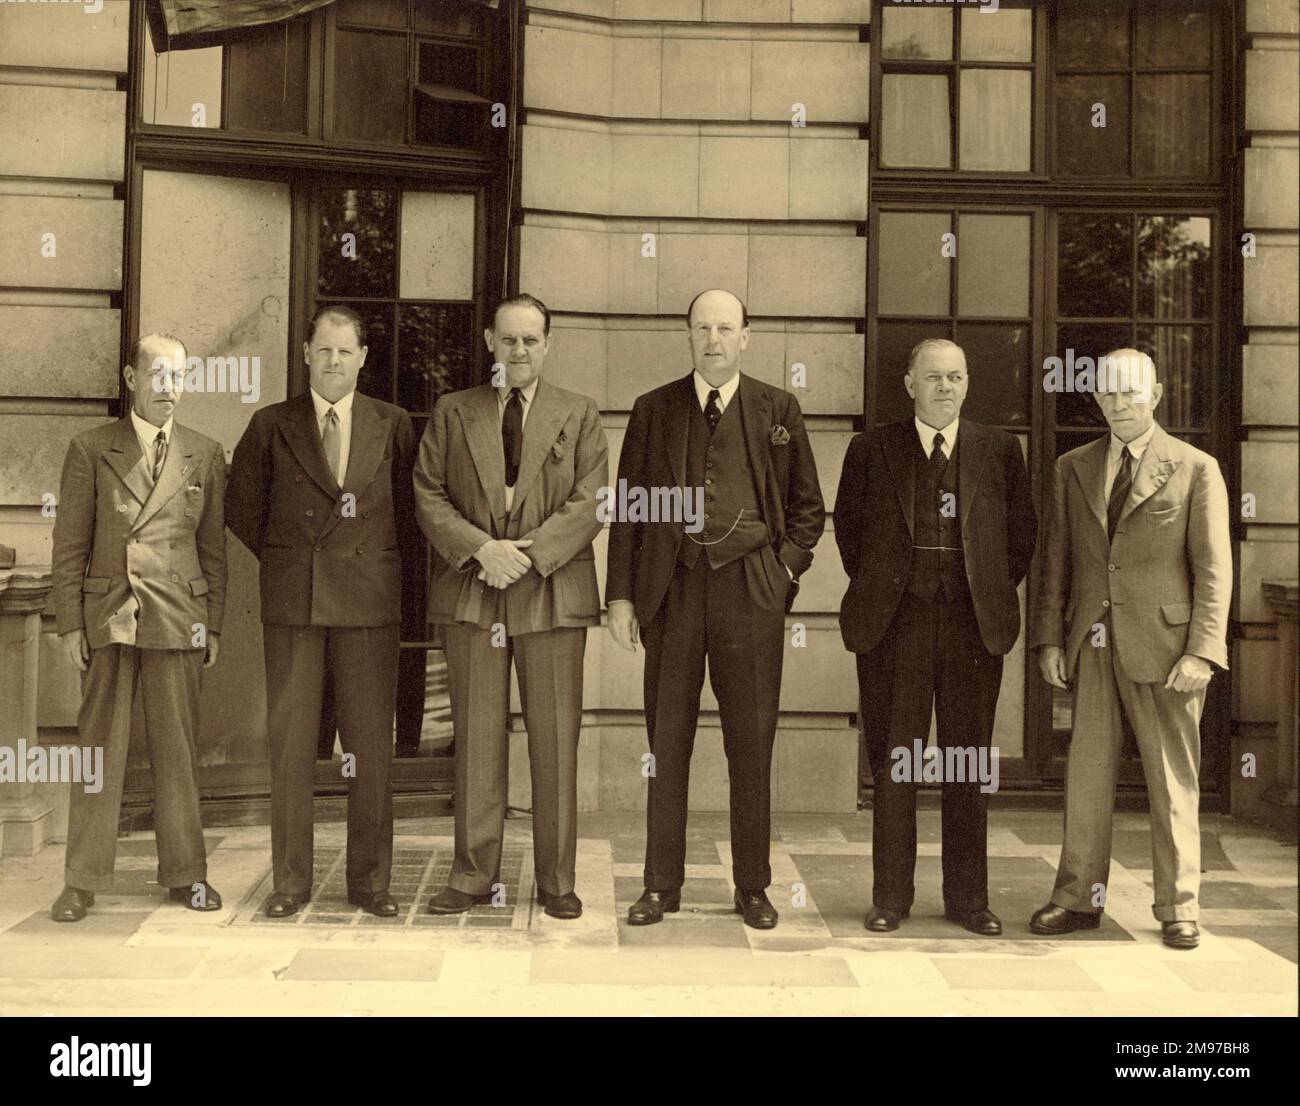 The Royal Aeronautical Society Advisory Committee to the Ministry of Supply, appointed in 1941, at the rear of No.4 Hamilton Place. From left: Capt J.L. Pritchard, RAeS Secretary and Secretary of the Committee; Major F.P. Halford, de Havilland Engines; Sir A.H. Roy Fedden, Chairman; Lord Brabazon of Tara, Minister of Supply; Sir Arthur Gouge, Chief Desiner, Short Brothers, and C.C. Walker, Chief Engineer, de Havilland Aircraft. Stock Photo